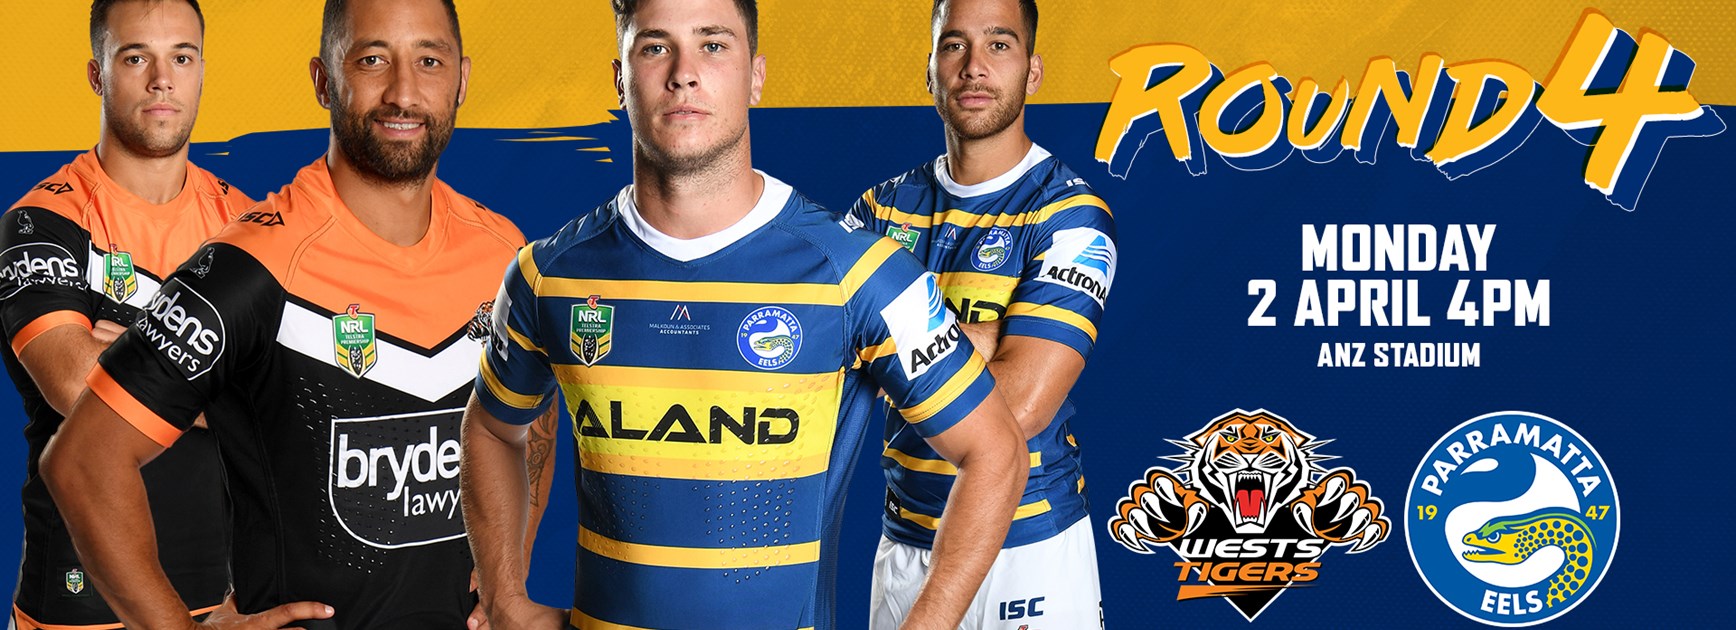 Wests Tigers v Eels - Game Day Info